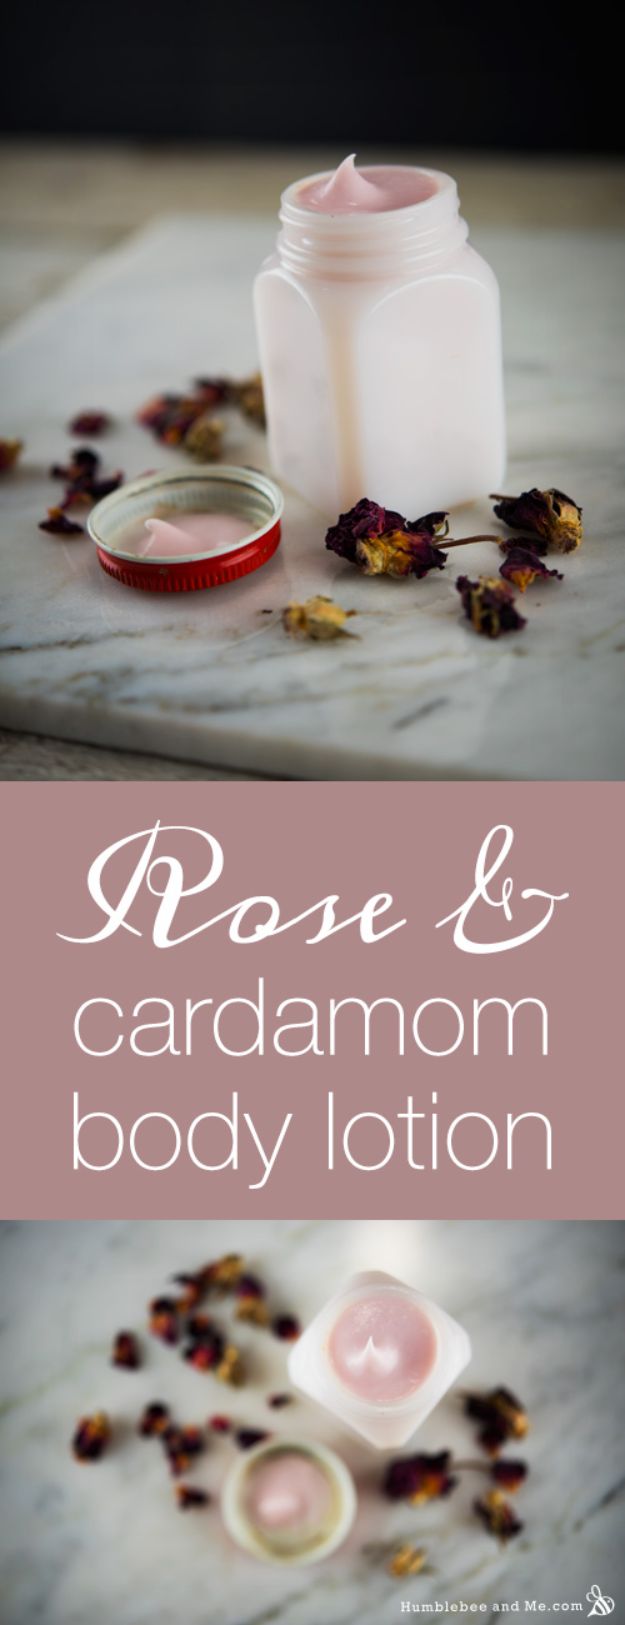 Rose Crafts - Rose Cardamom Body Lotion - Easy Craft Projects With Roses - Paper Flowers, Quilt Patterns, DIY Rose Art for Kids - Dried and Real Roses for Wall Art and Do It Yourself Home Decor - Mothers Day Gift Ideas - Fake Rose Arrangements That Look Amazing - Cute Centerrpieces and Crafty DIY Gifts With A Rose http://diyjoy.com/rose-crafts